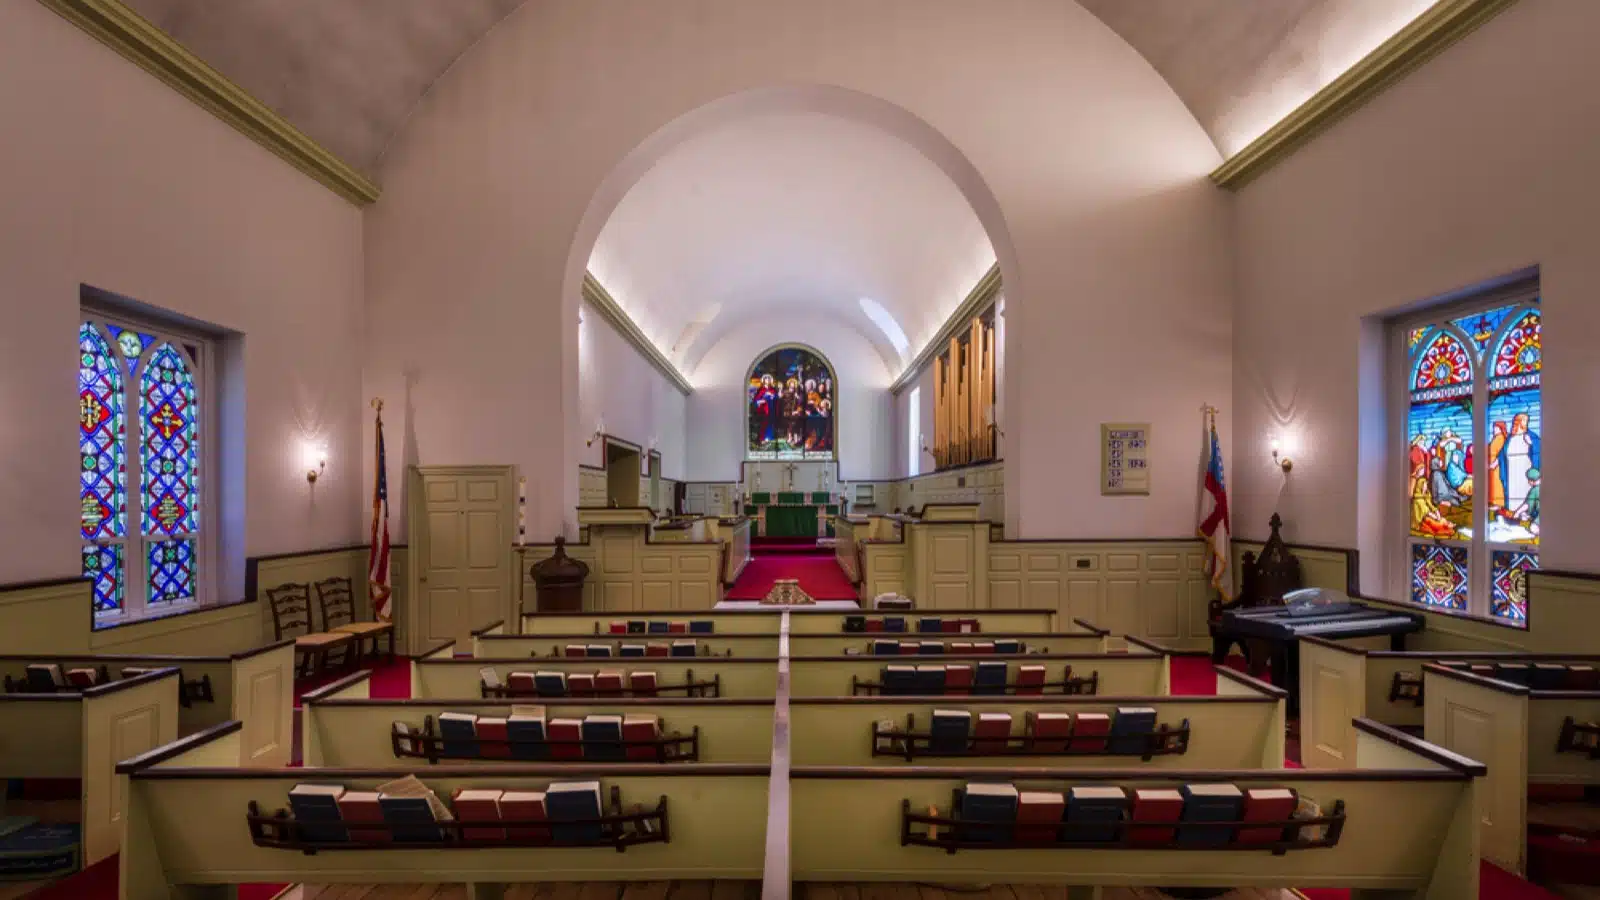 DOVER, DELAWARE - JULY 19: Christ Episcopal Church (1734) on State Street on July 19, 2015 in Dover, Delaware